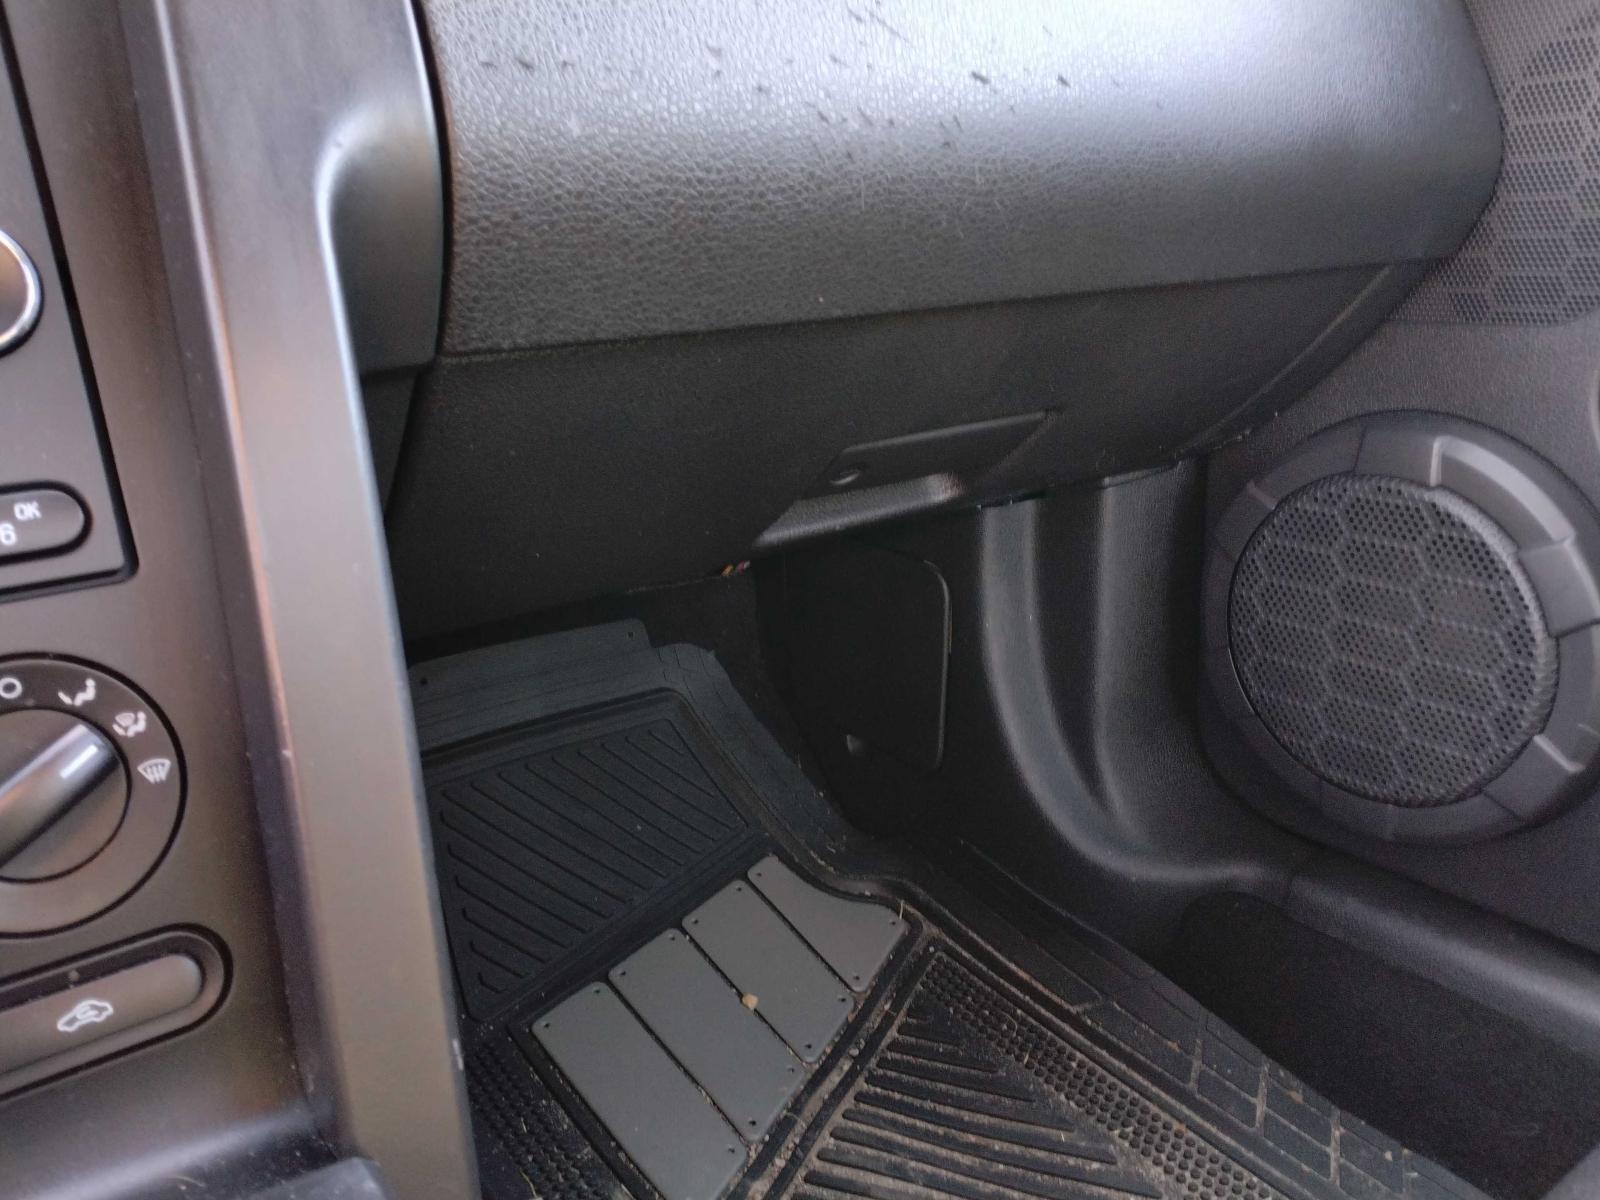 Used Glove Box fits: 2008 Ford Mustang Glove Box Grade A